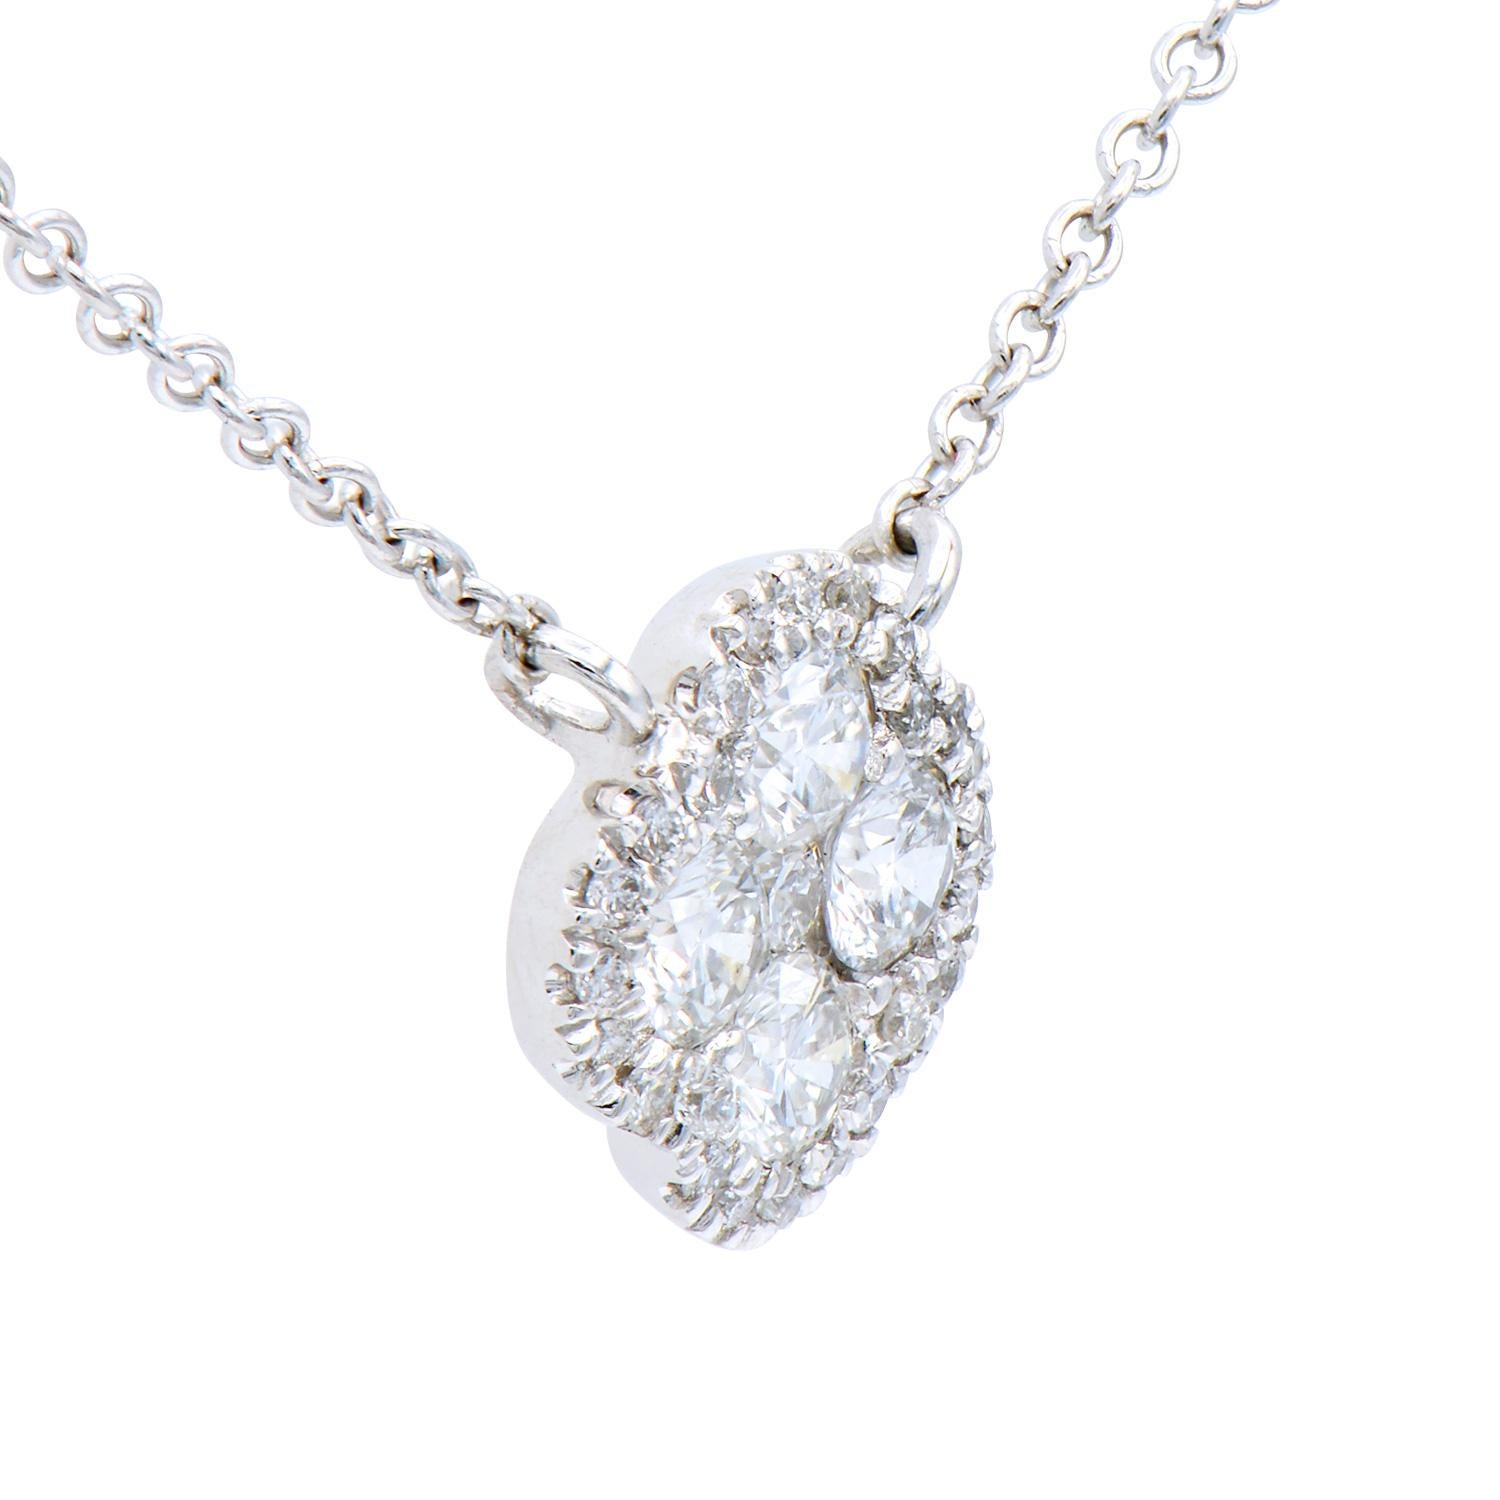 This beautiful necklace uses a variety of diamond sizes to create a stunning cluster. There are 29 SI1, H color diamonds totaling 0.21 carats. They are set in 2.3 grams of 14 karat white gold with a 14 karat white gold wheat chain attached. This